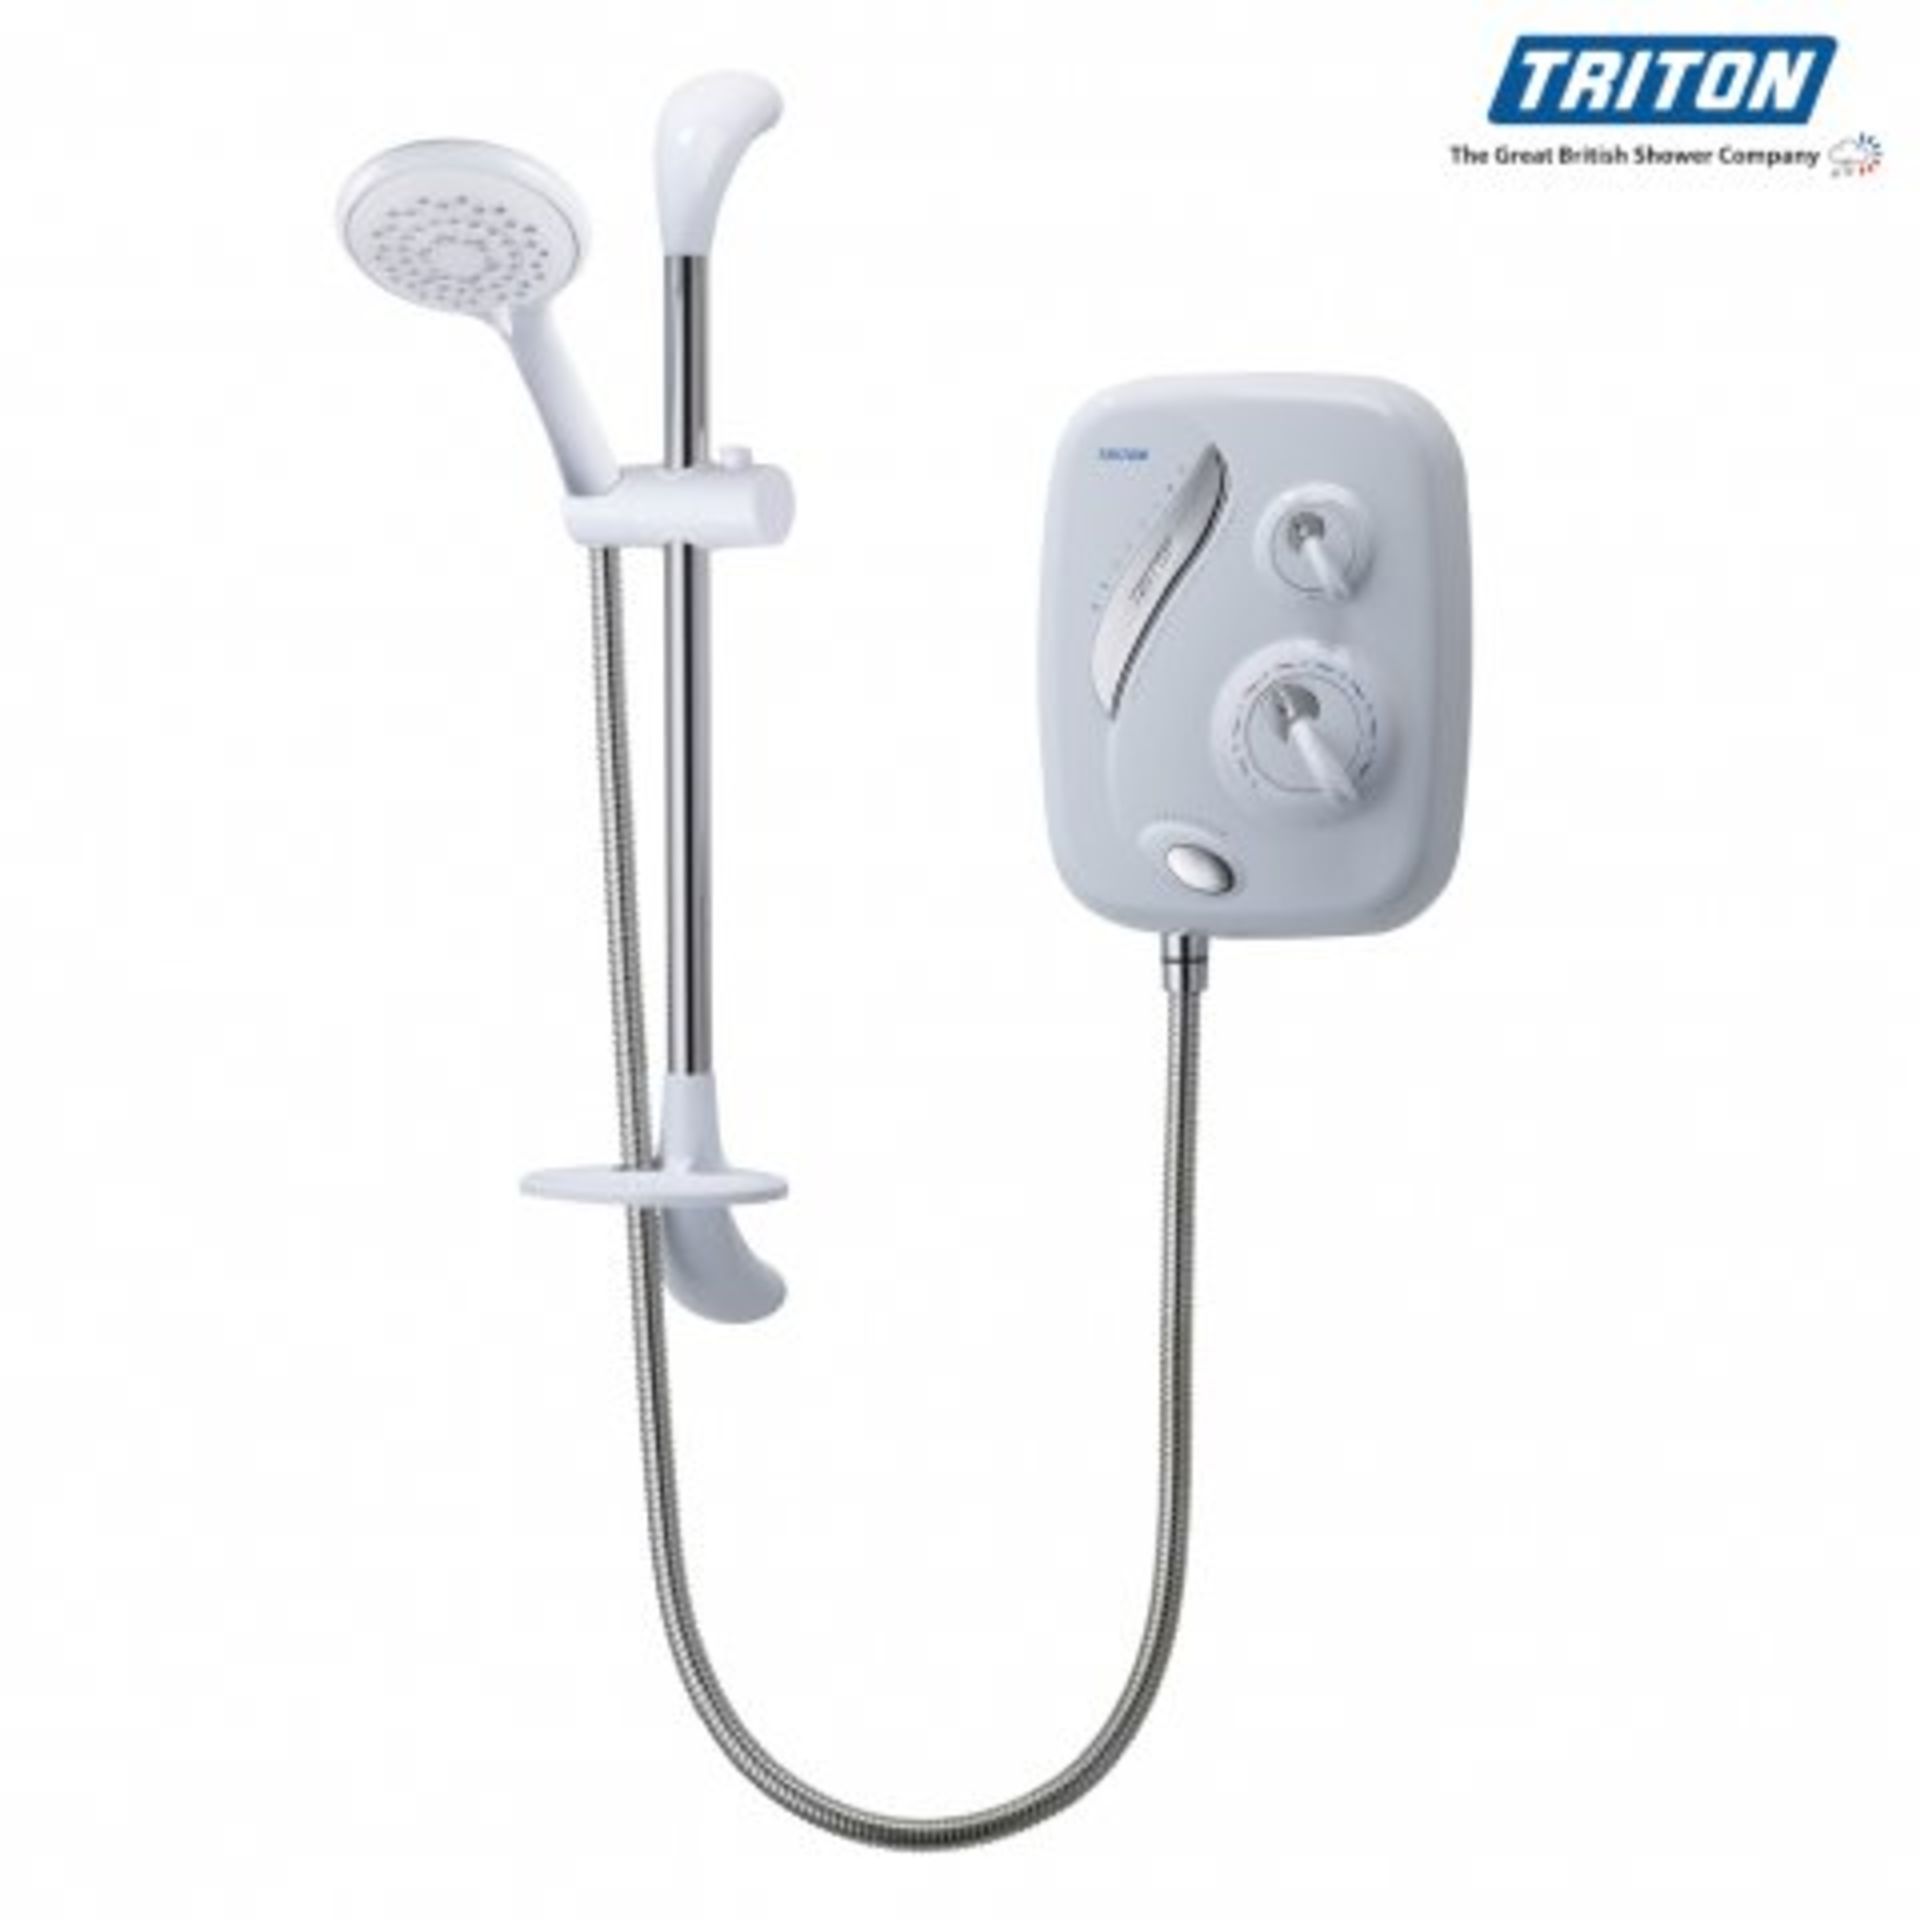 (AA46) Triton AS2000XT Thermostatic Power Shower - White. RRP £299.99. These sleek showers are